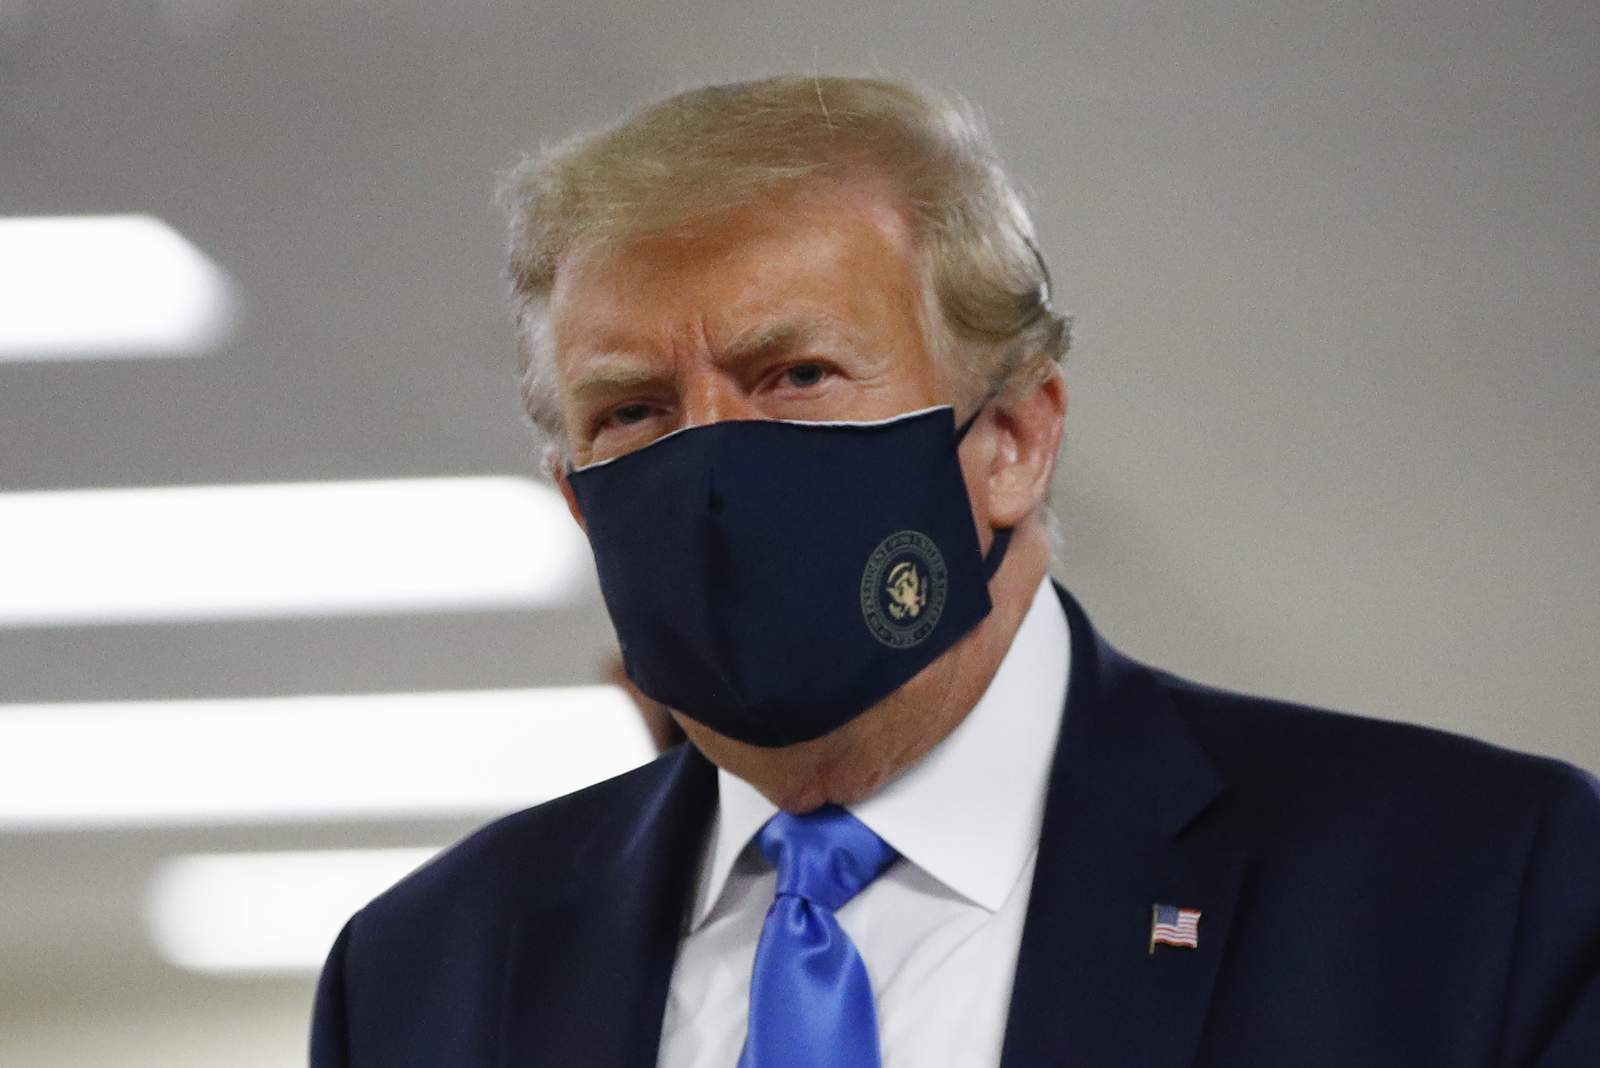 Too little, too late? Trump embraces masks in an about-face